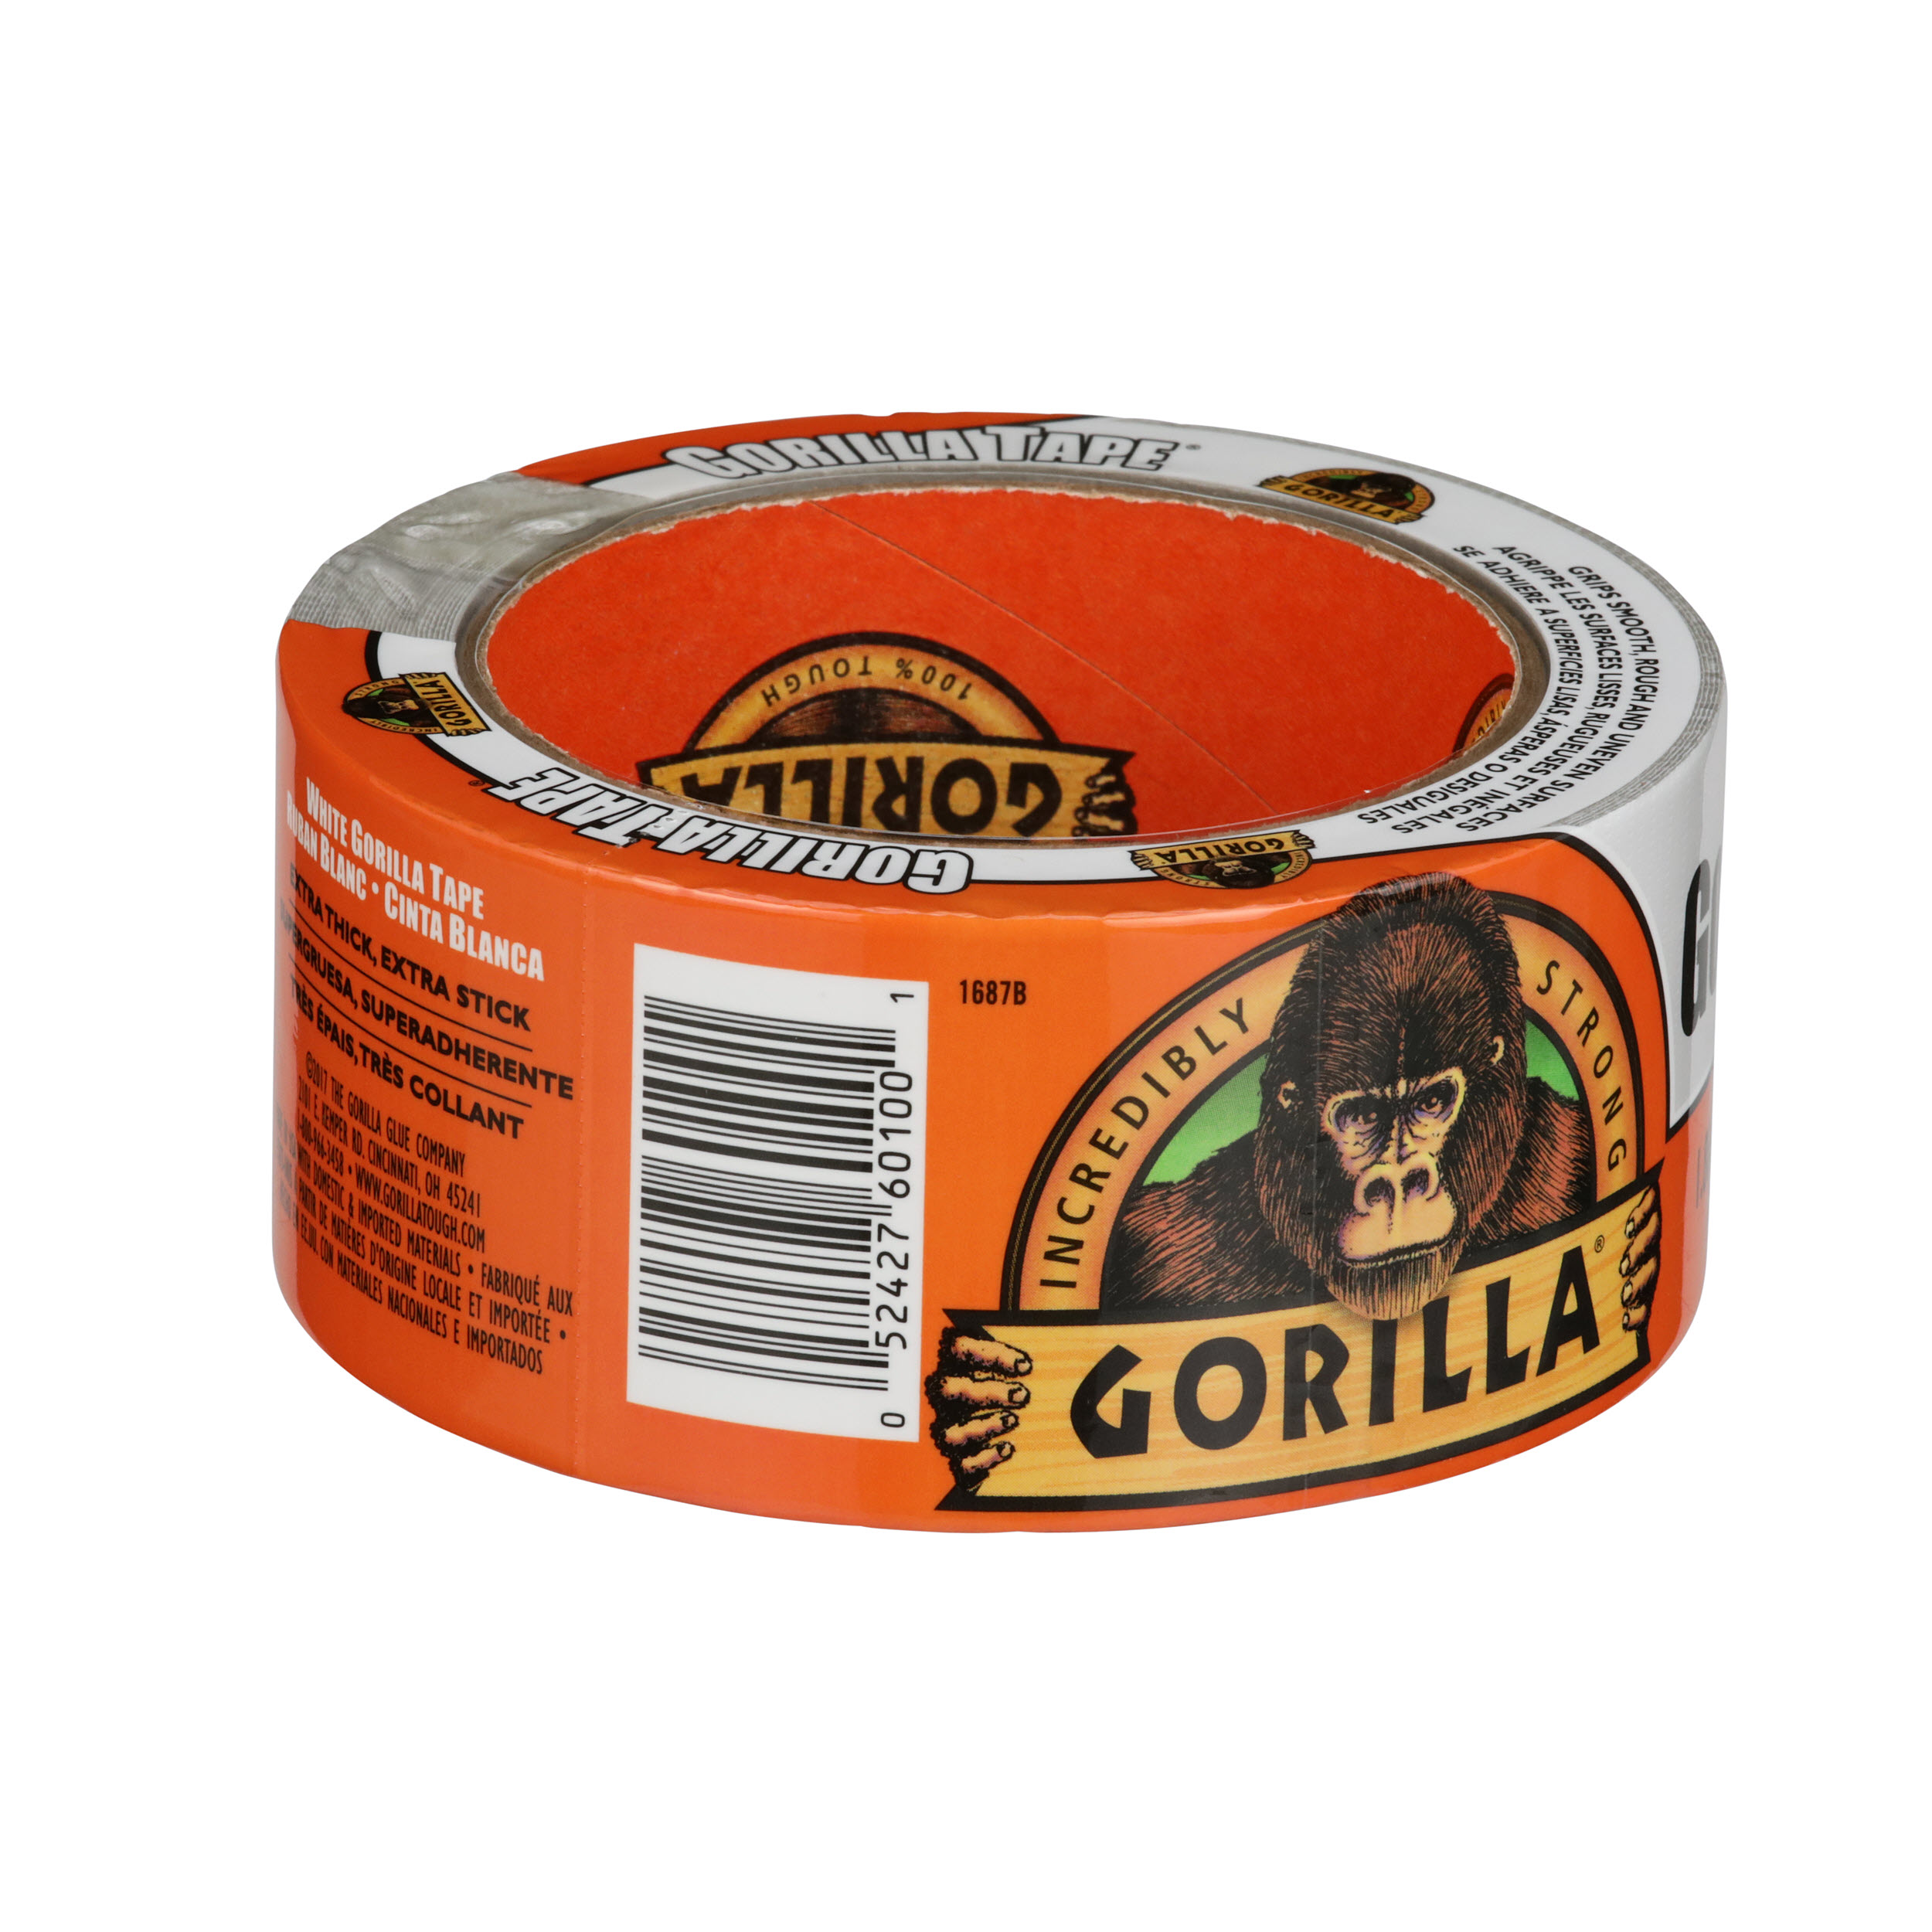 Gorilla ADHGGT230 White Duct Tape, 2 x 30 yd.